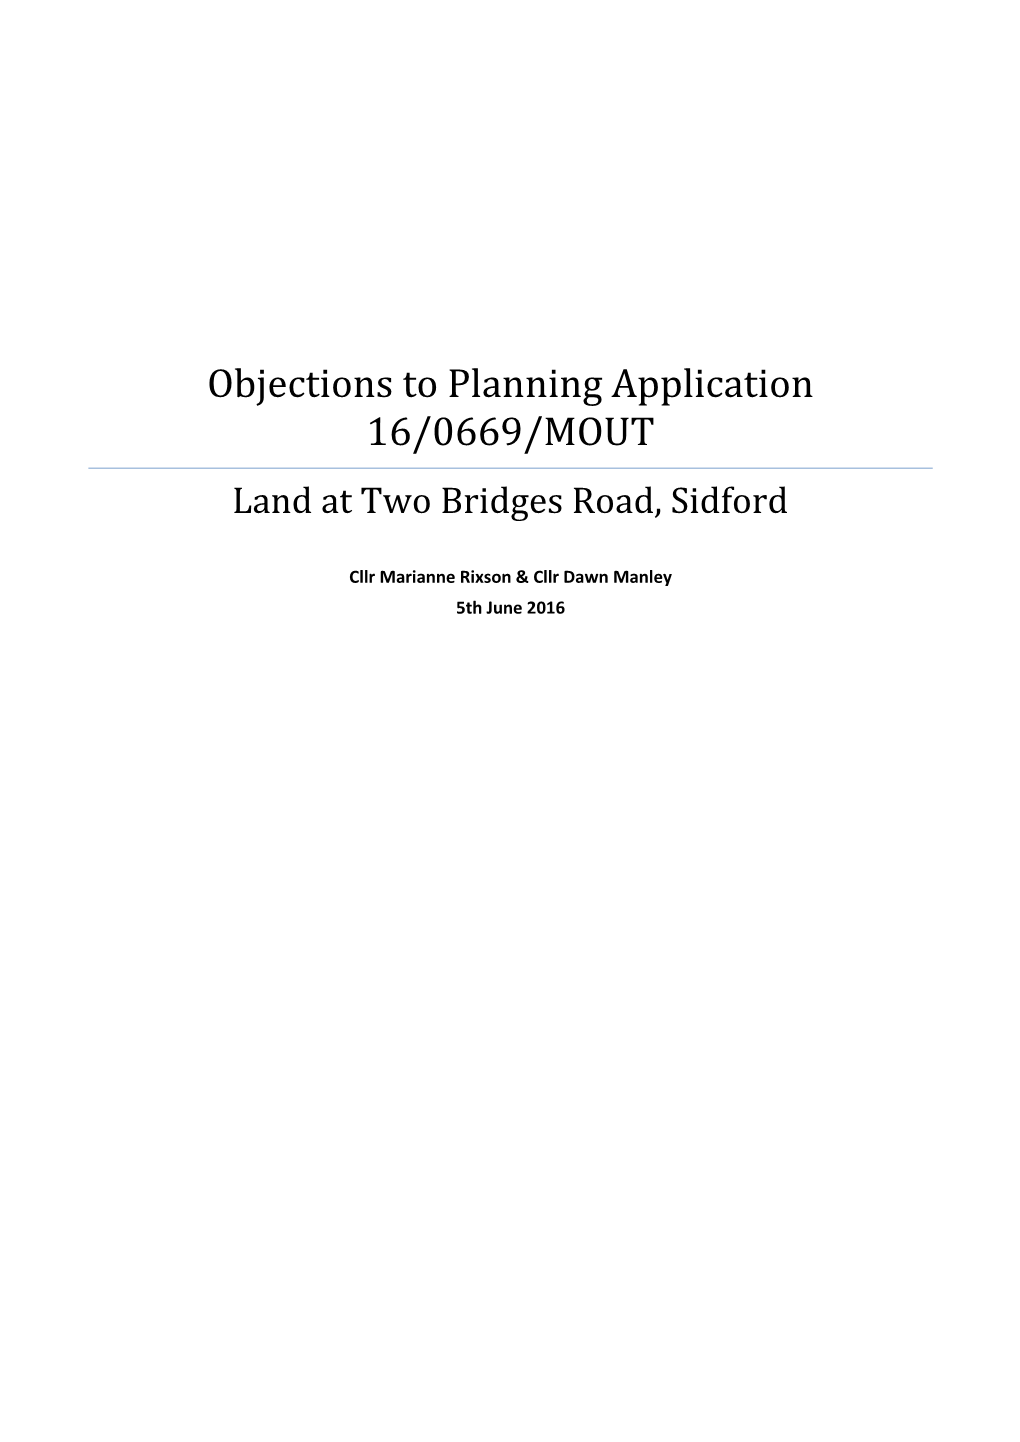 Objections to Planning Application 16/0669/MOUT Land at Two Bridges Road, Sidford